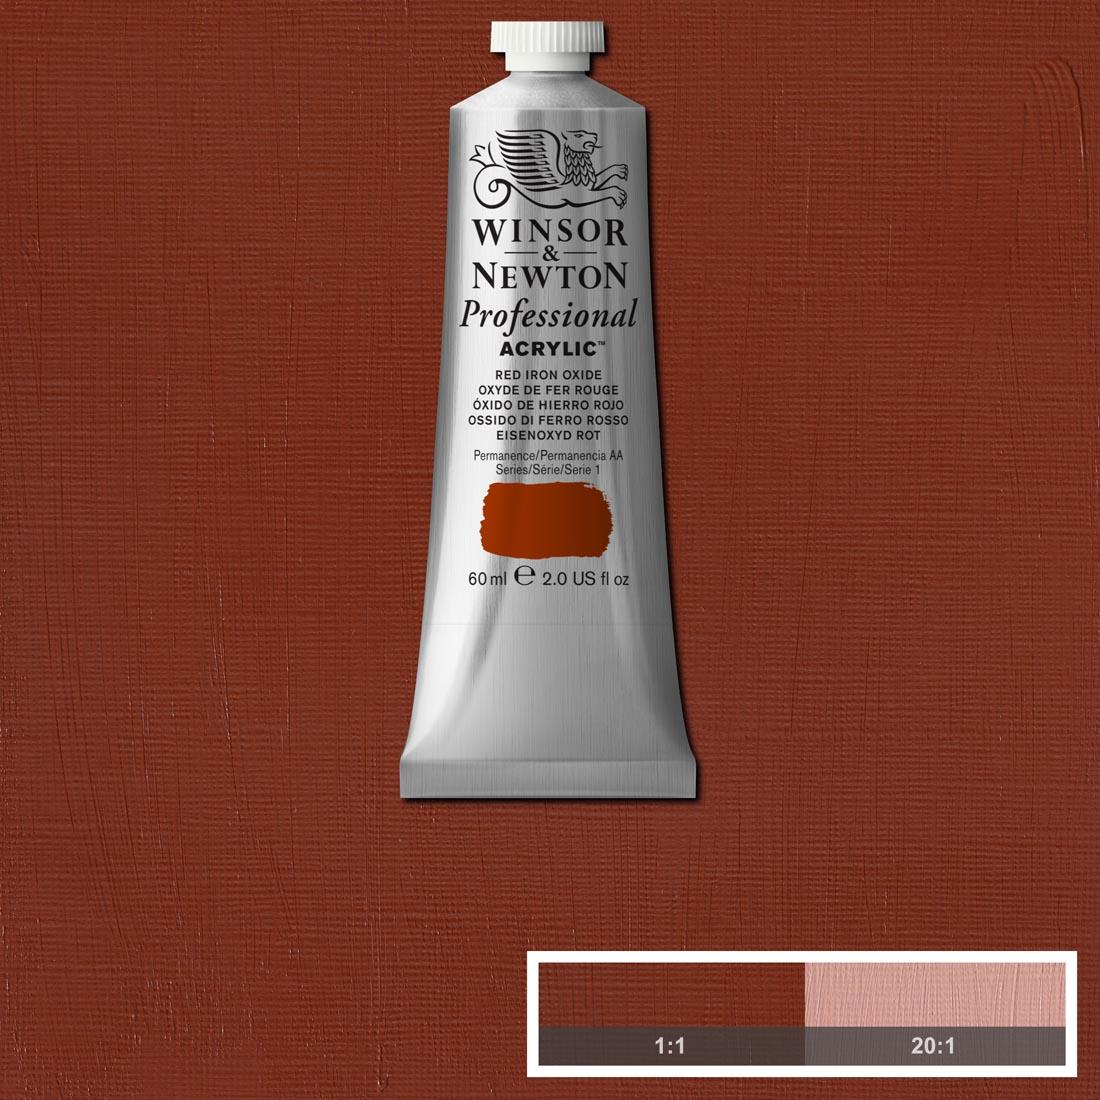 Tube of Red Iron Oxide Winsor and Newton Professional Acrylic with paint swatch in the background